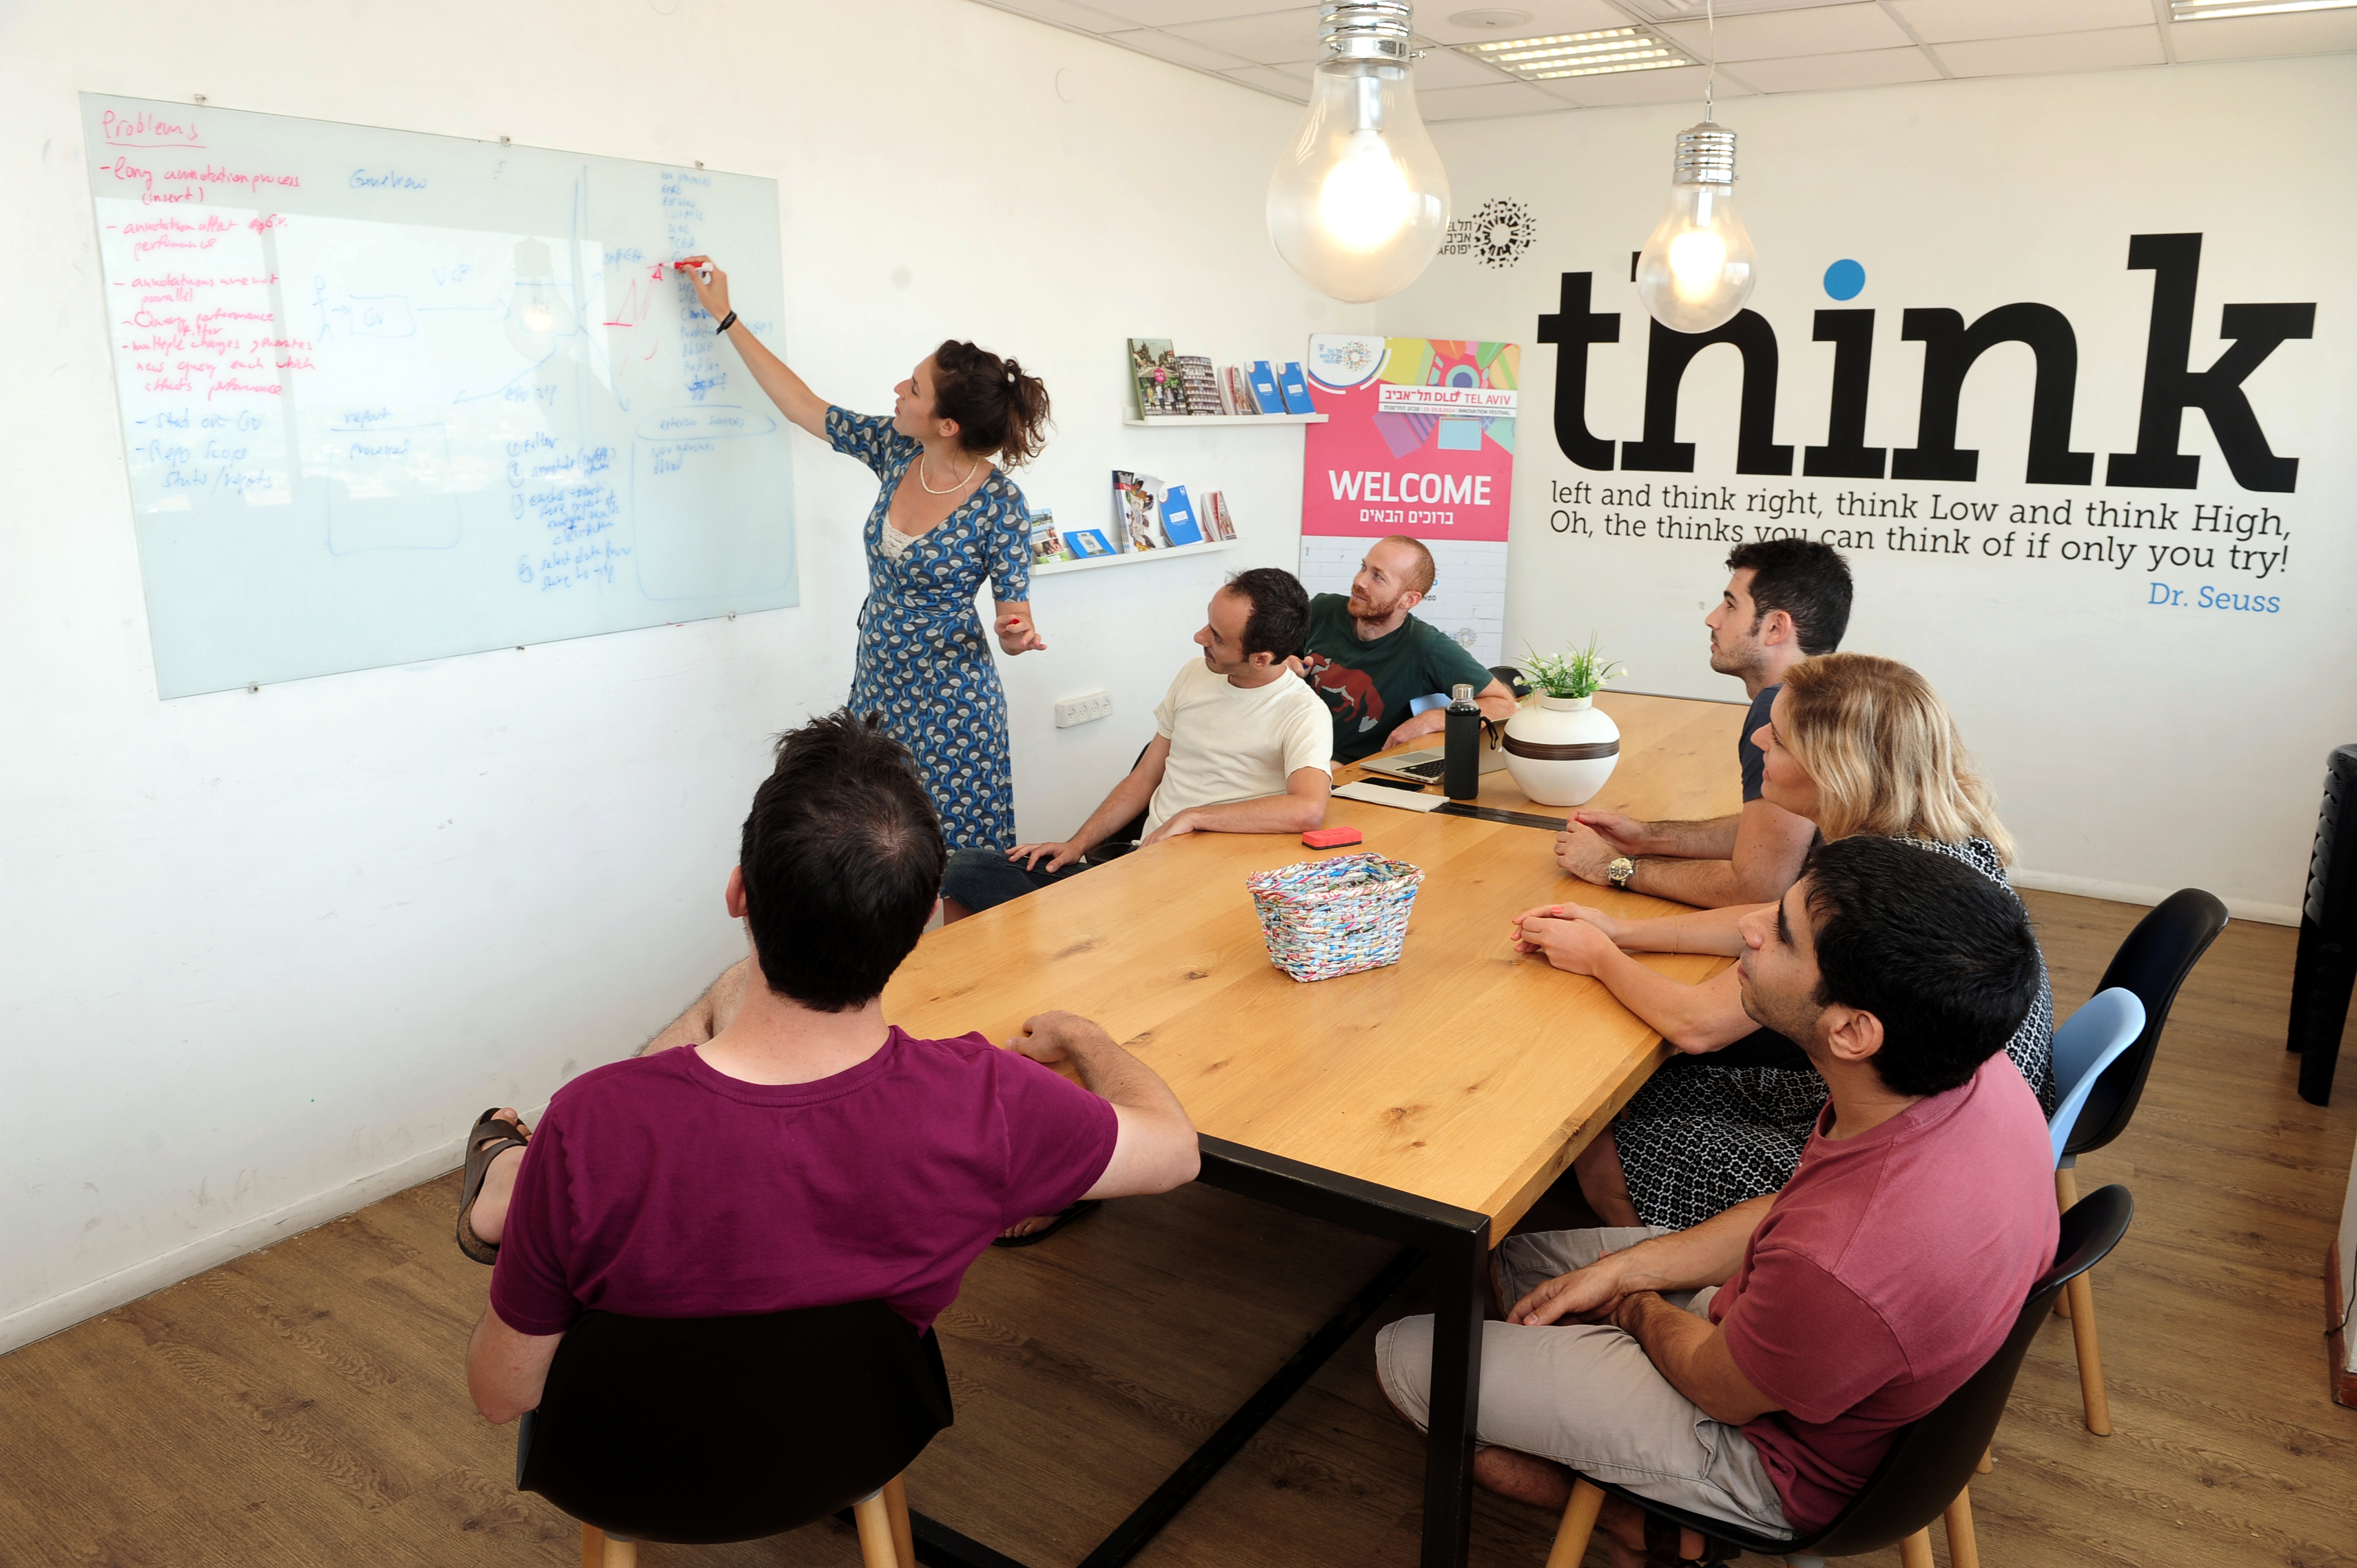 The municipality provides a startup lab in the city library and another in the north of Tel Aviv, and more than 50 co-working spaces across the city